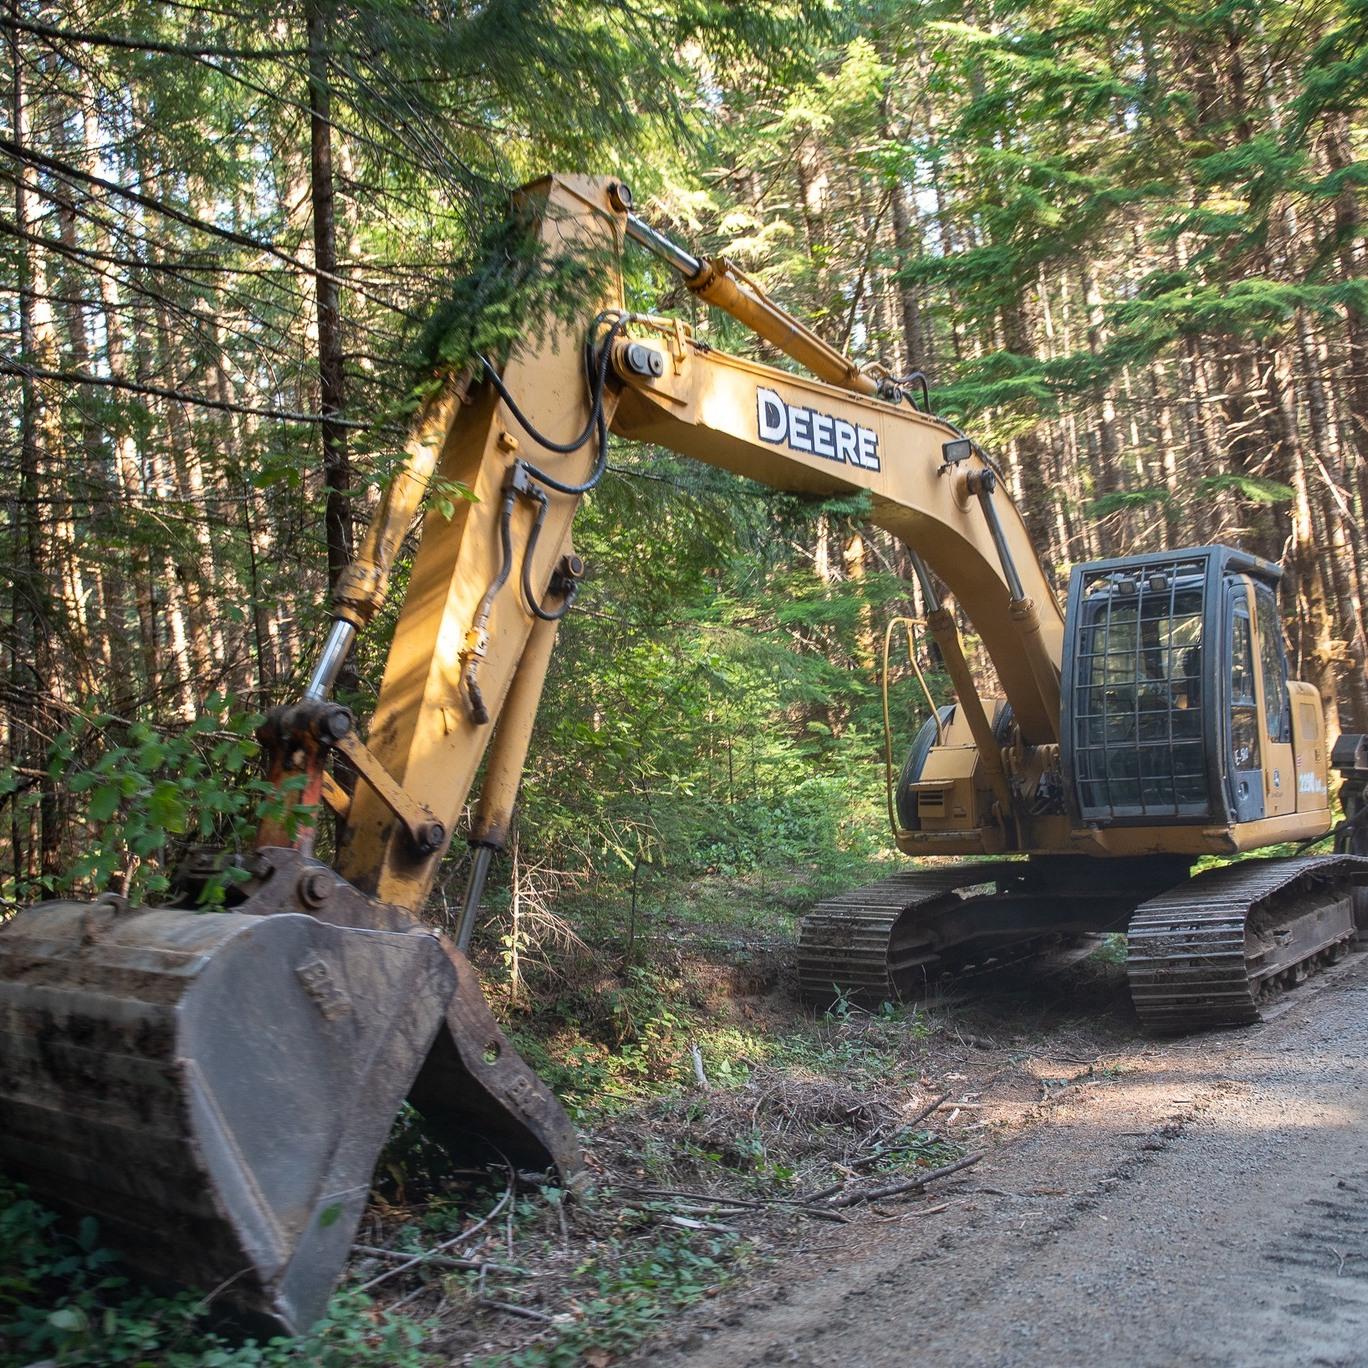 This is an image of an excavator working near the road